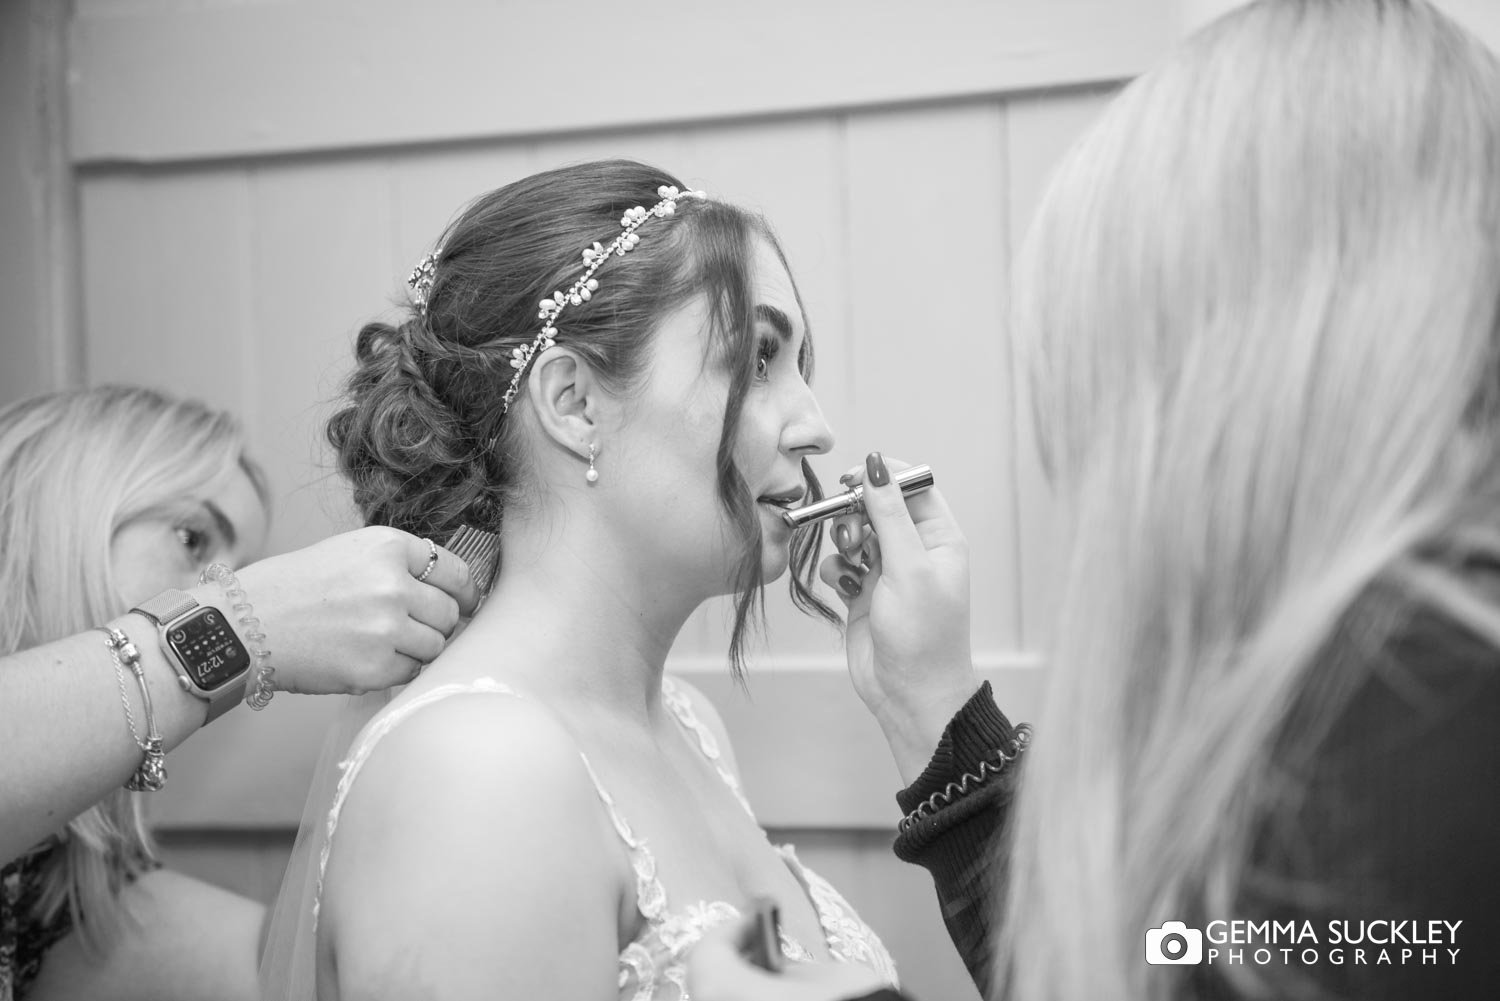 lipstick being applied to the brides